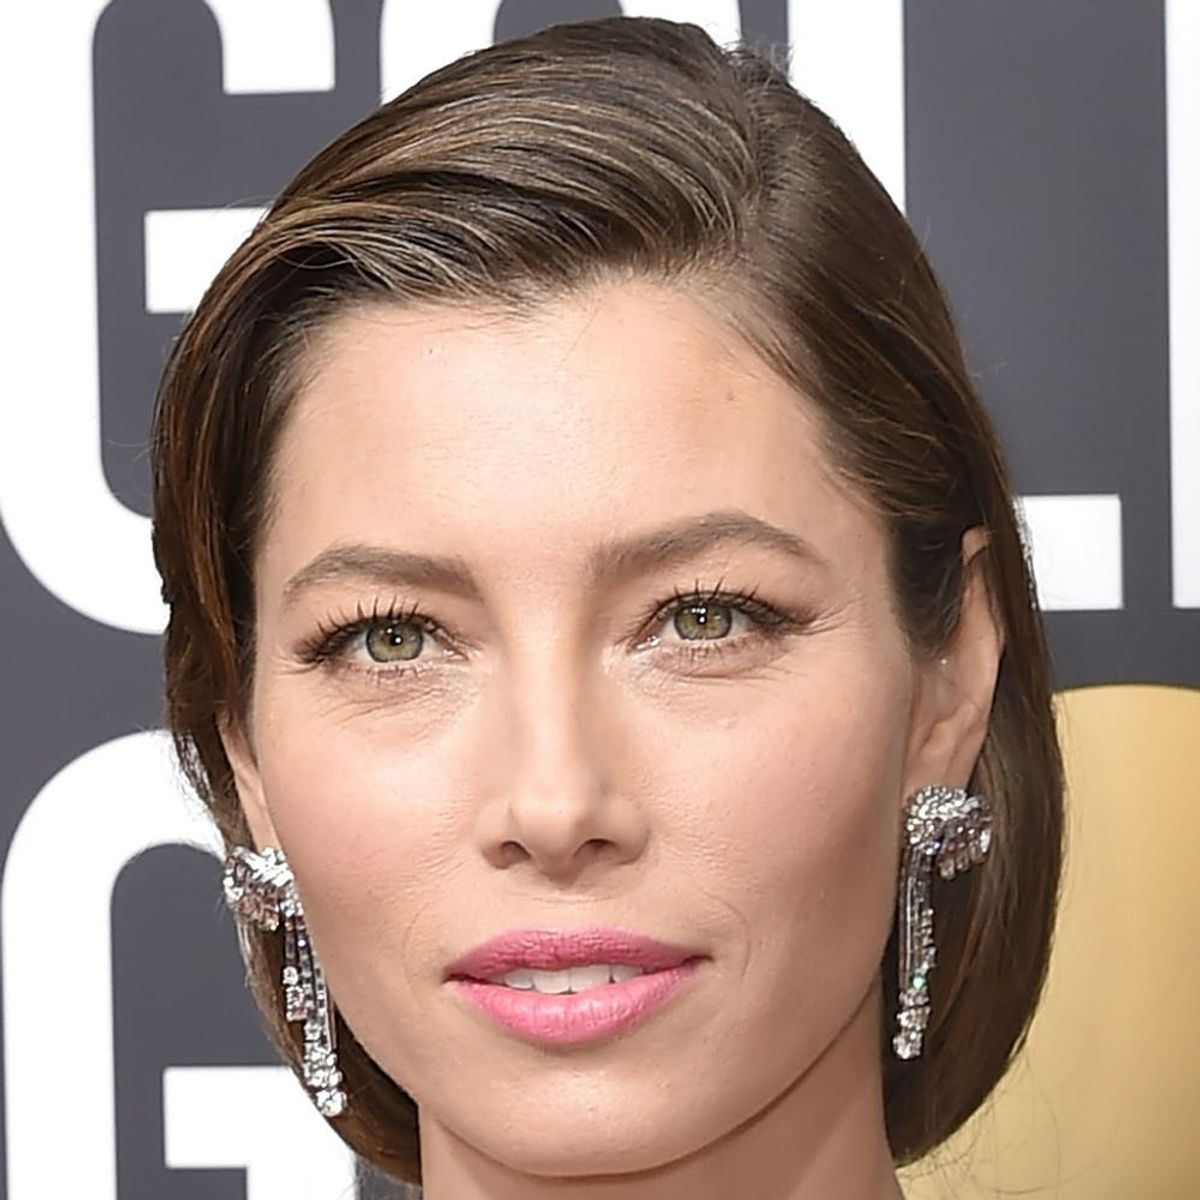 This Vintage Hairstyle Is Officially Trendy Thanks to the 2018 Golden Globes